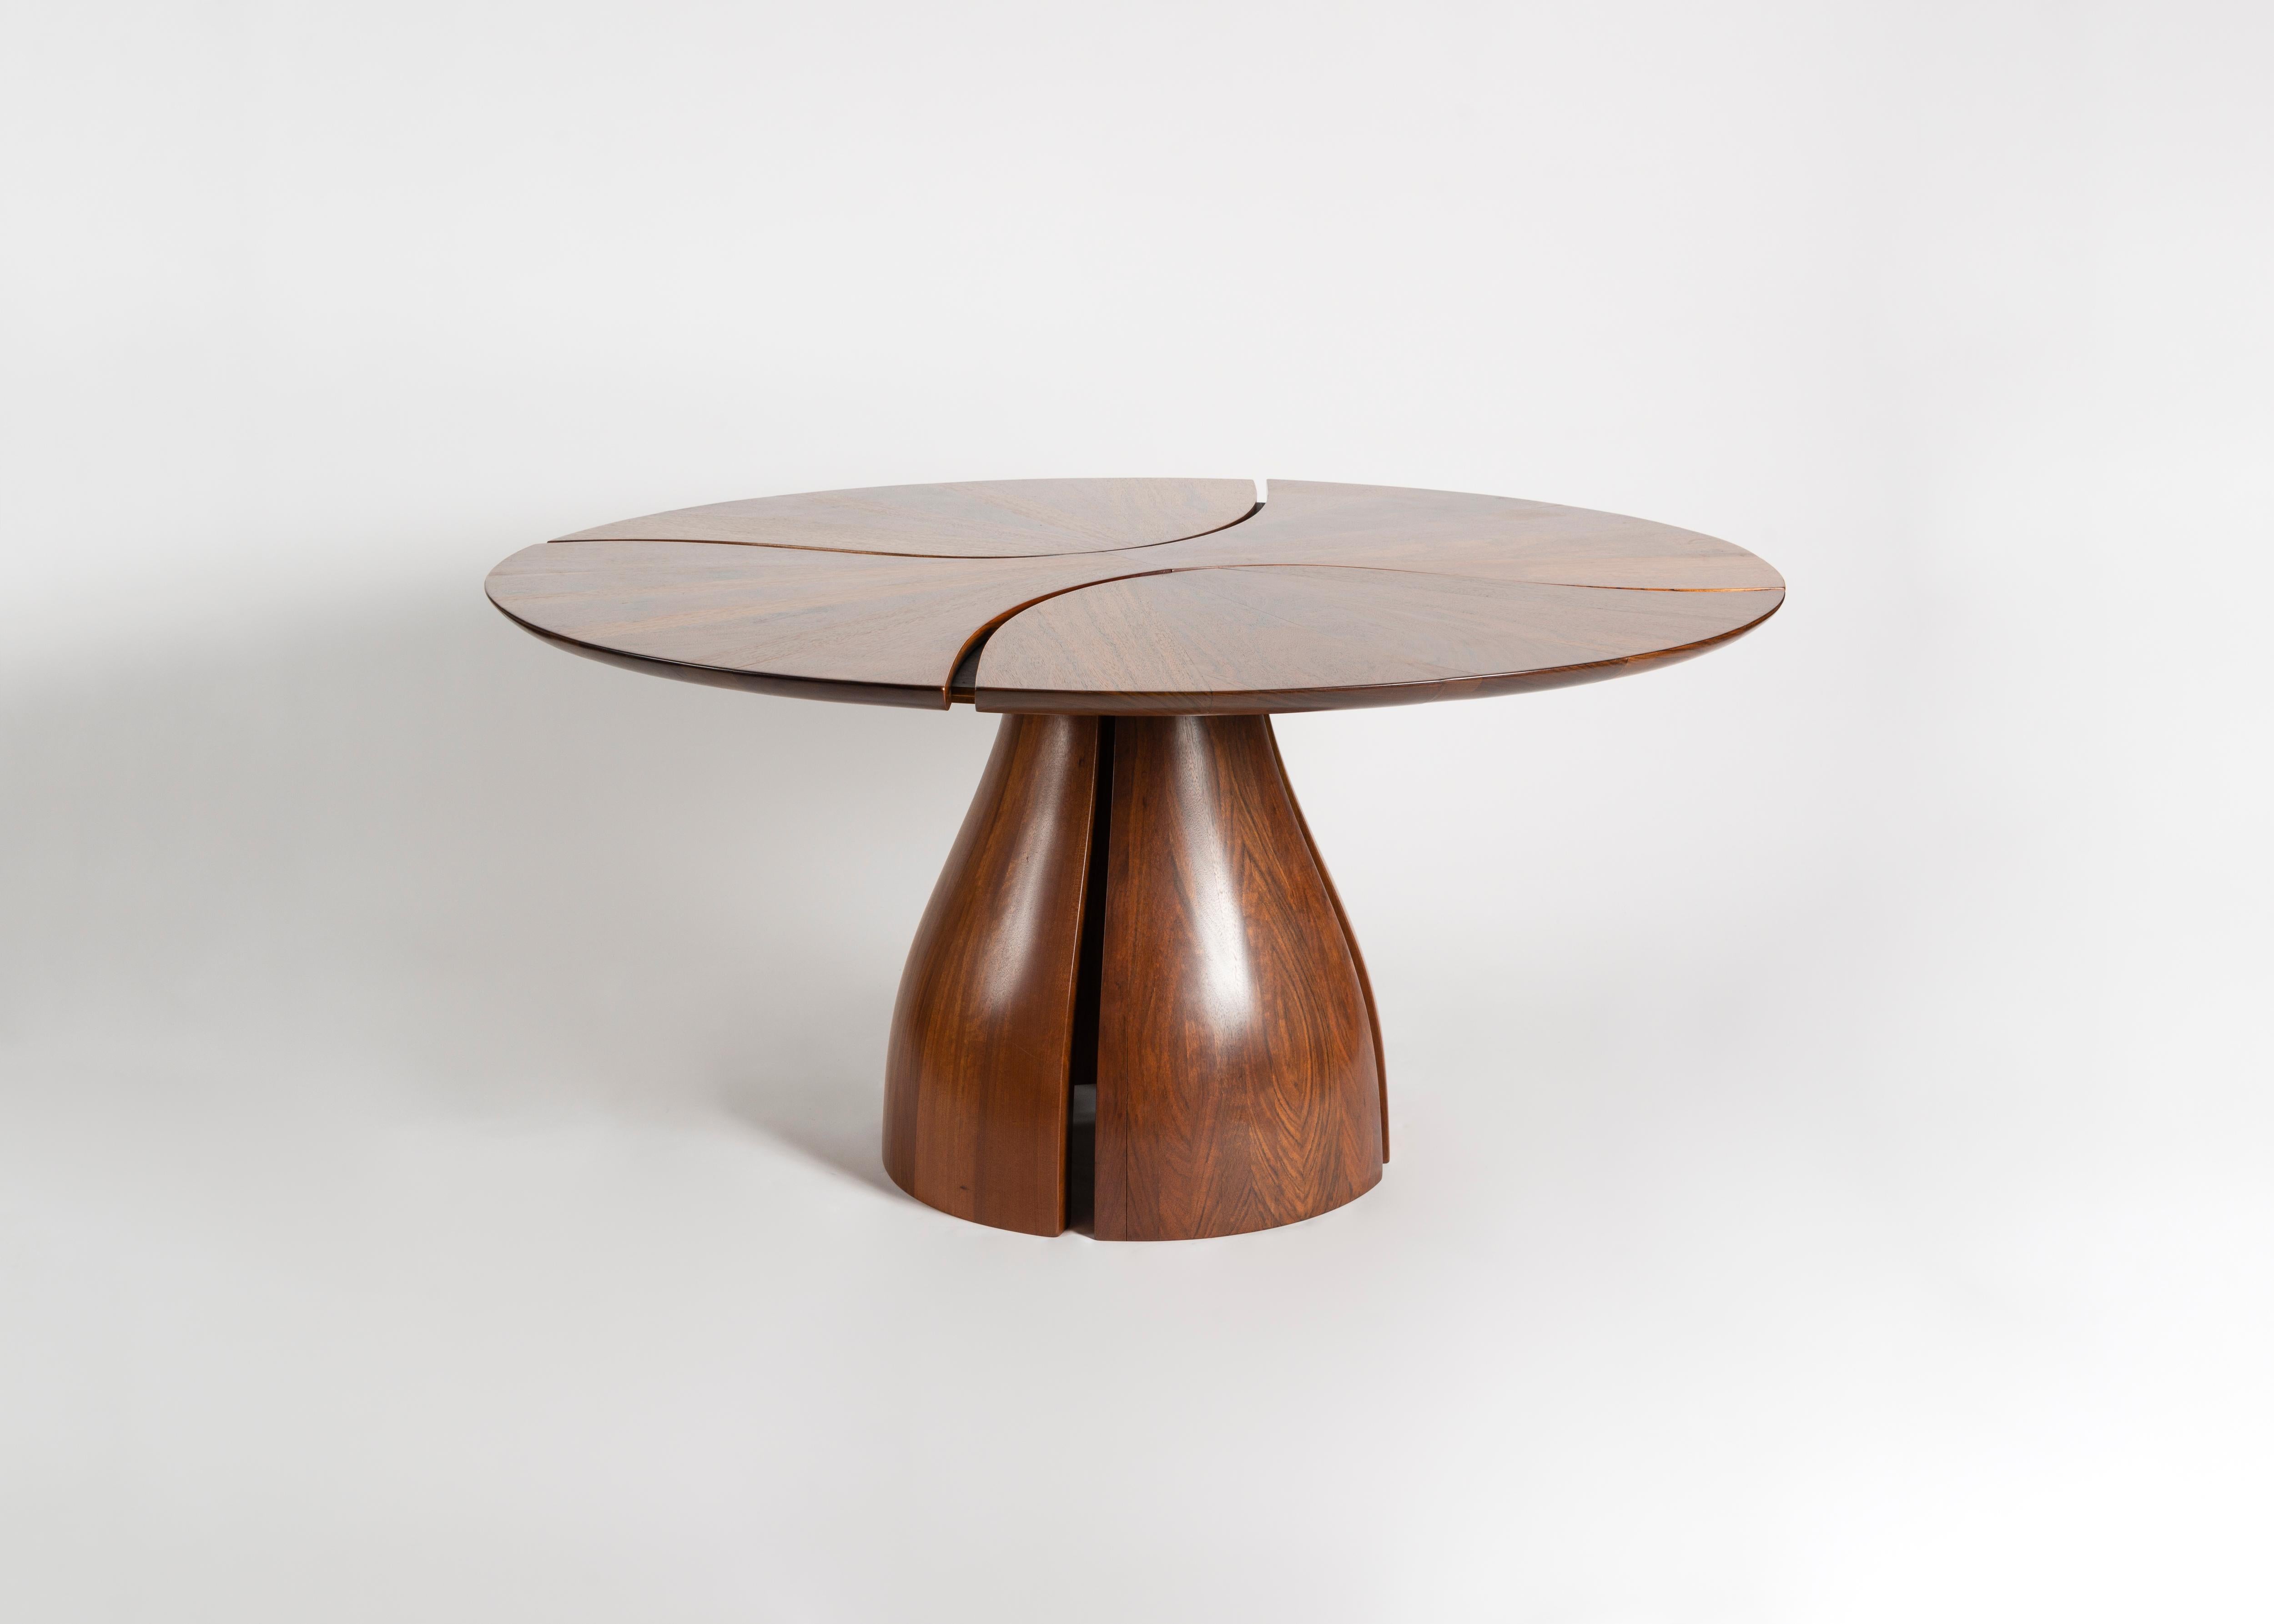 This sculptural table is composed of several pieces of Mozambique wood fitted seamlessly to create the shape of a lily. Like much of Michael Coffey's work, the piece sets up a contrast between the flowing quality of the artist's forms and the